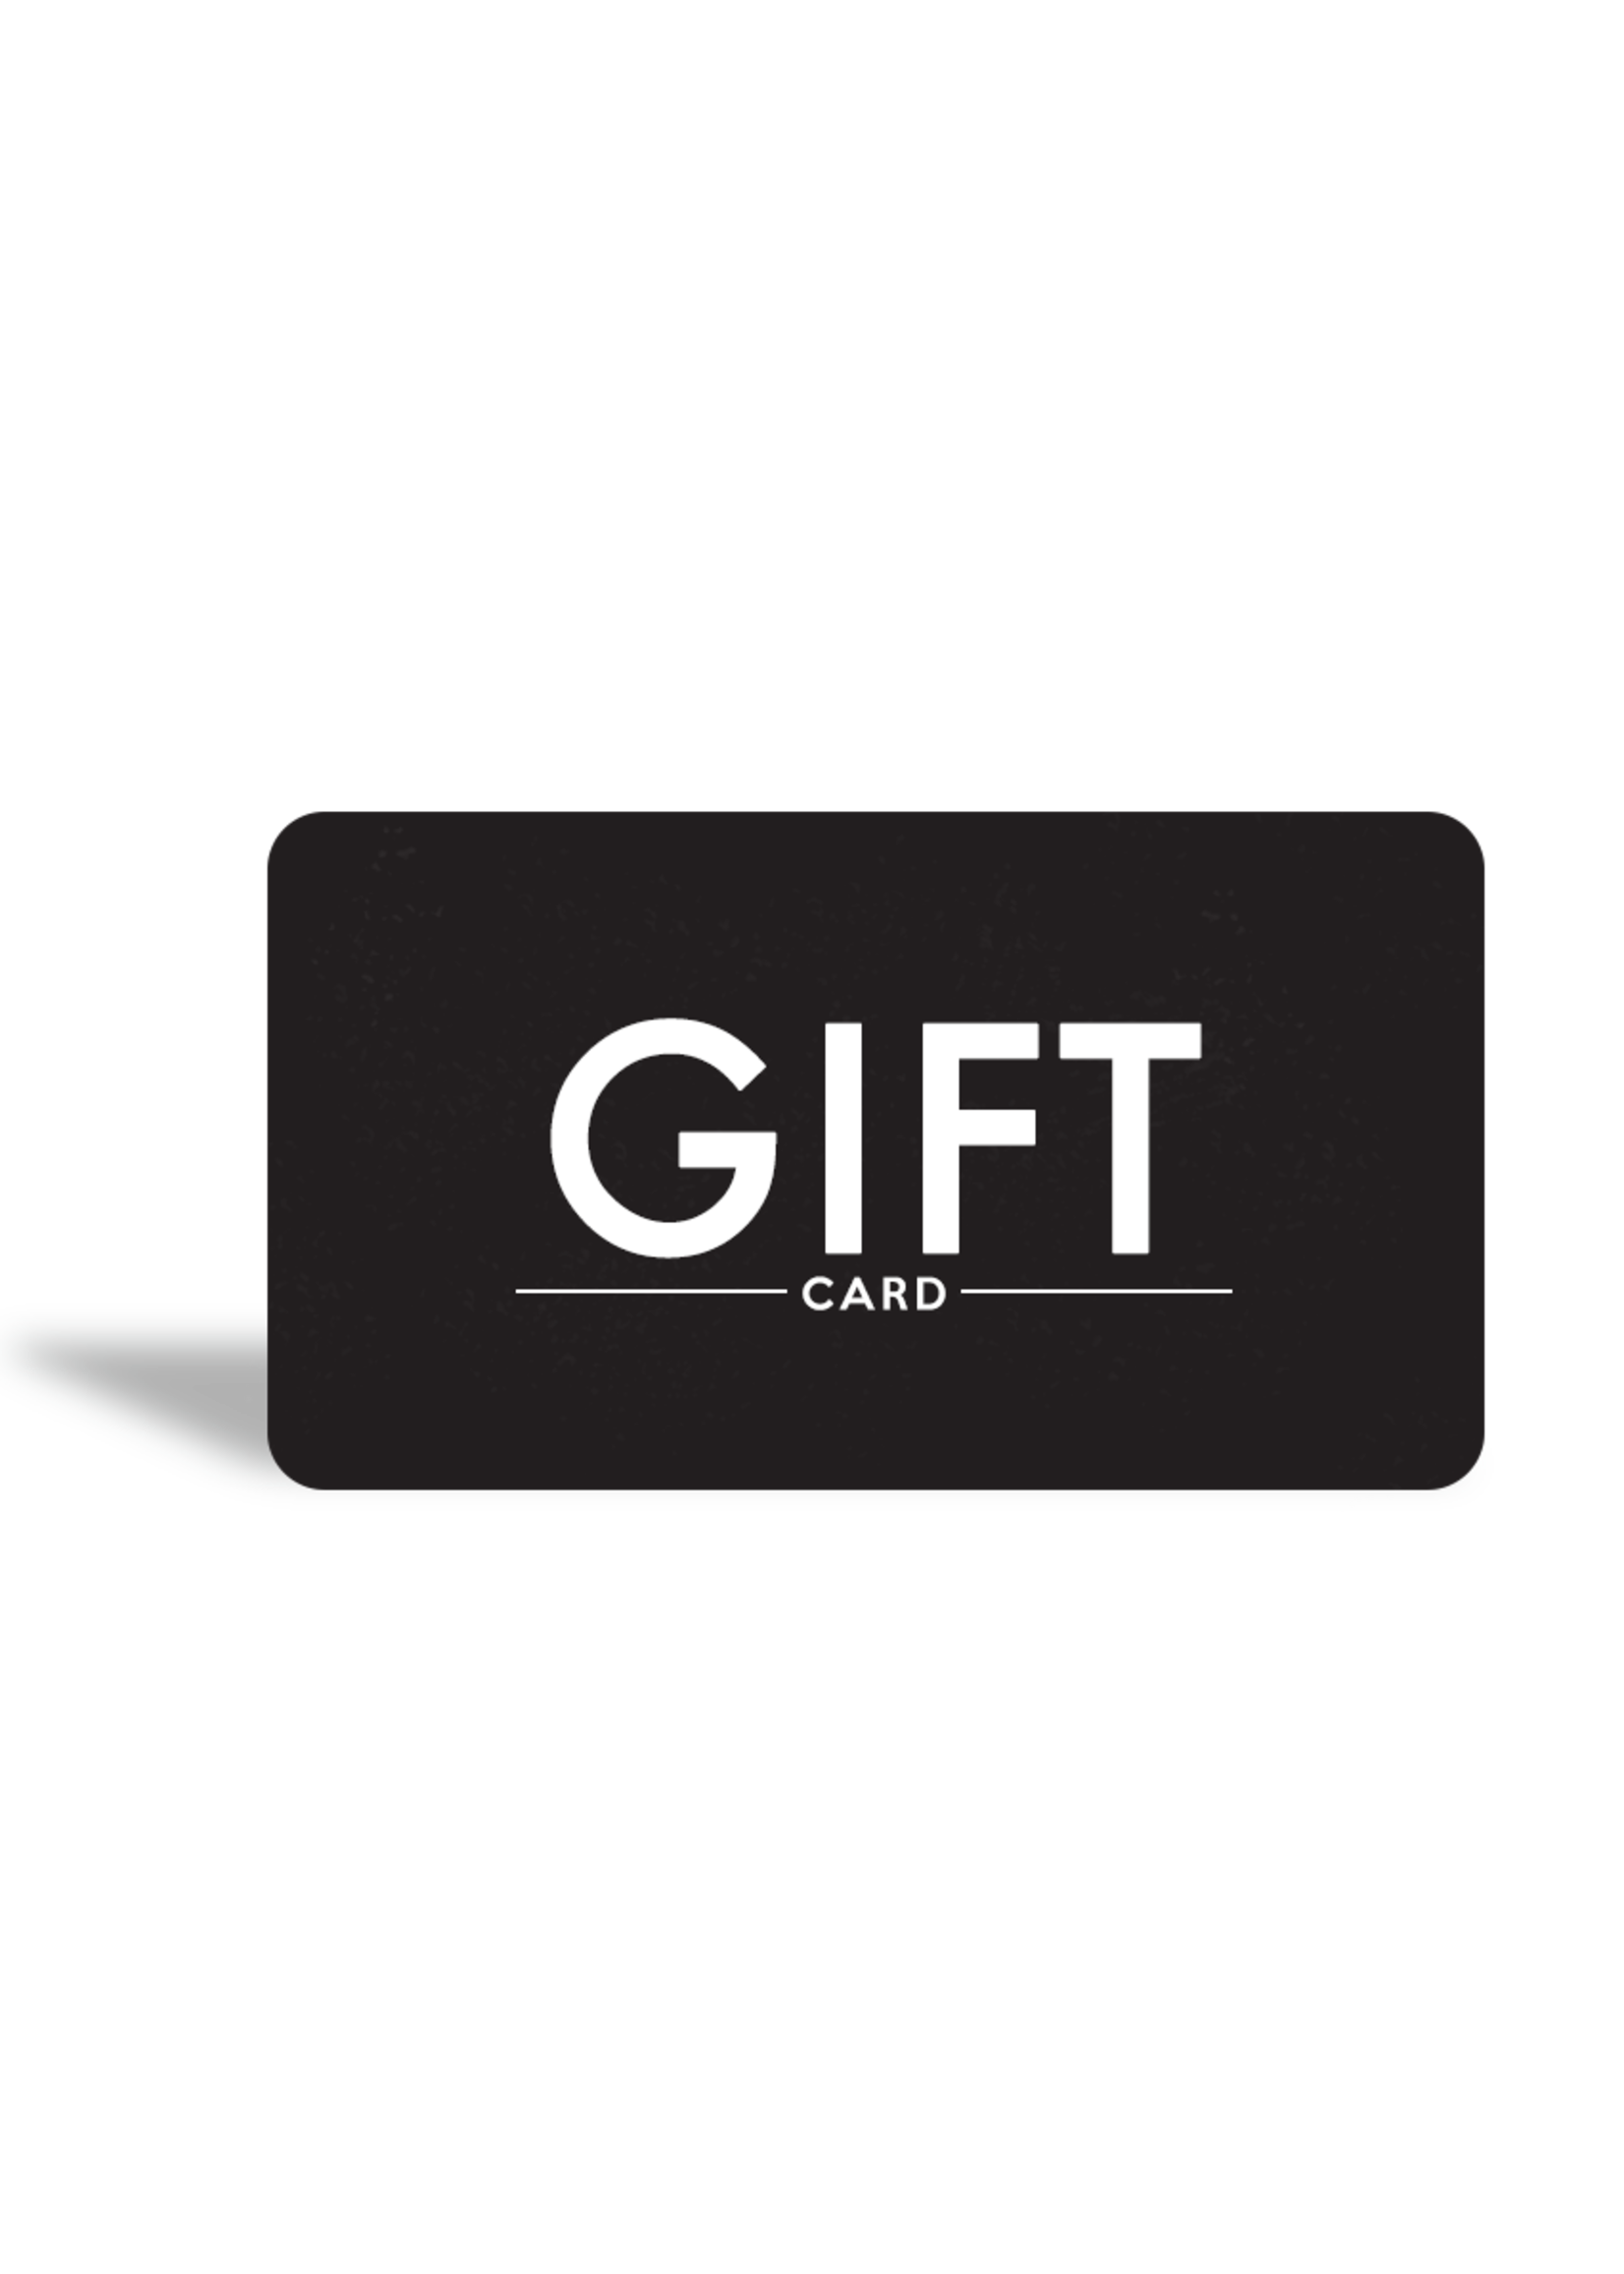 Gift card online - $75